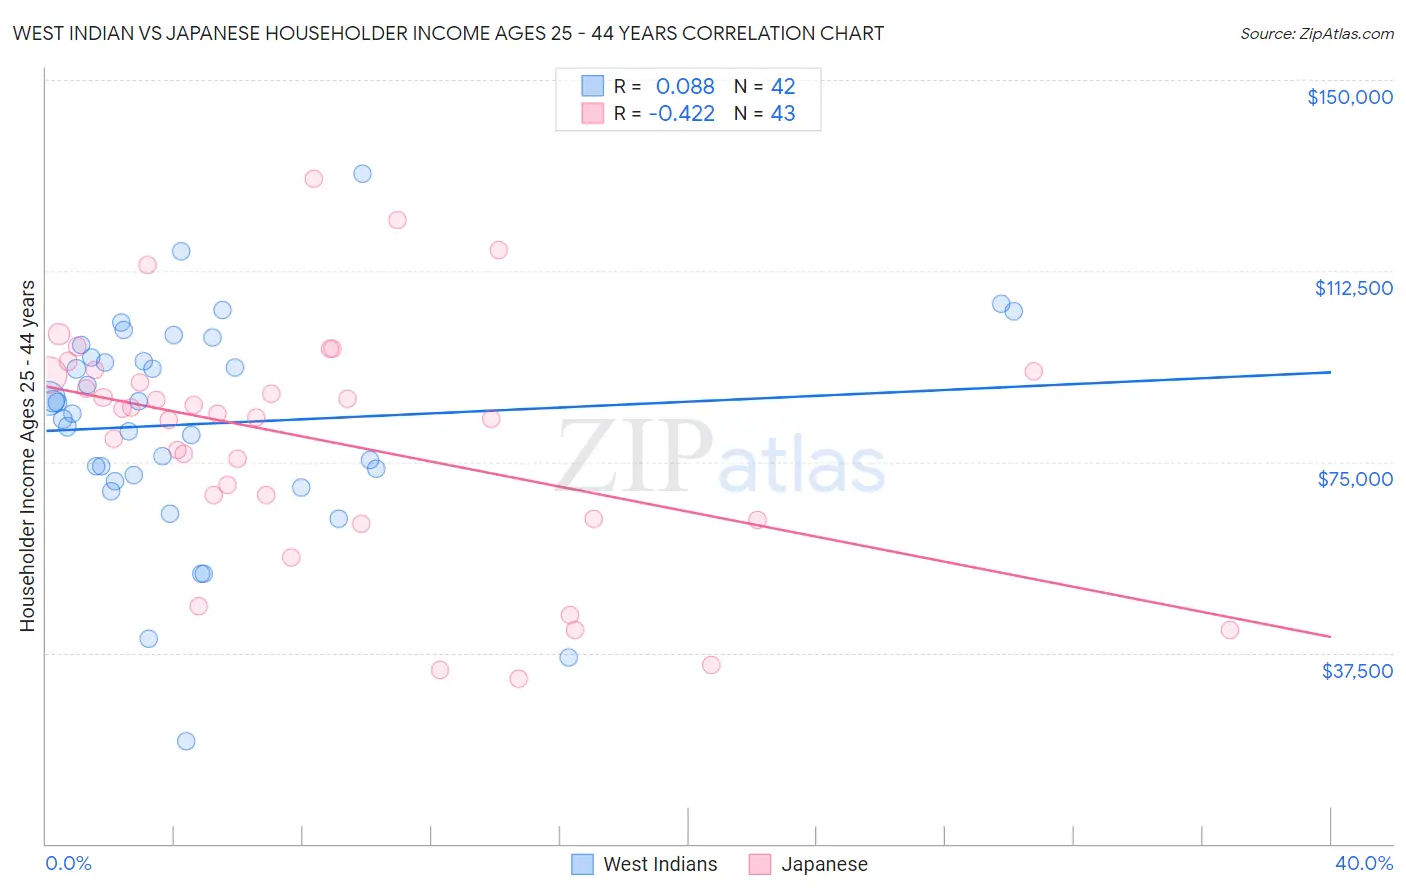 West Indian vs Japanese Householder Income Ages 25 - 44 years